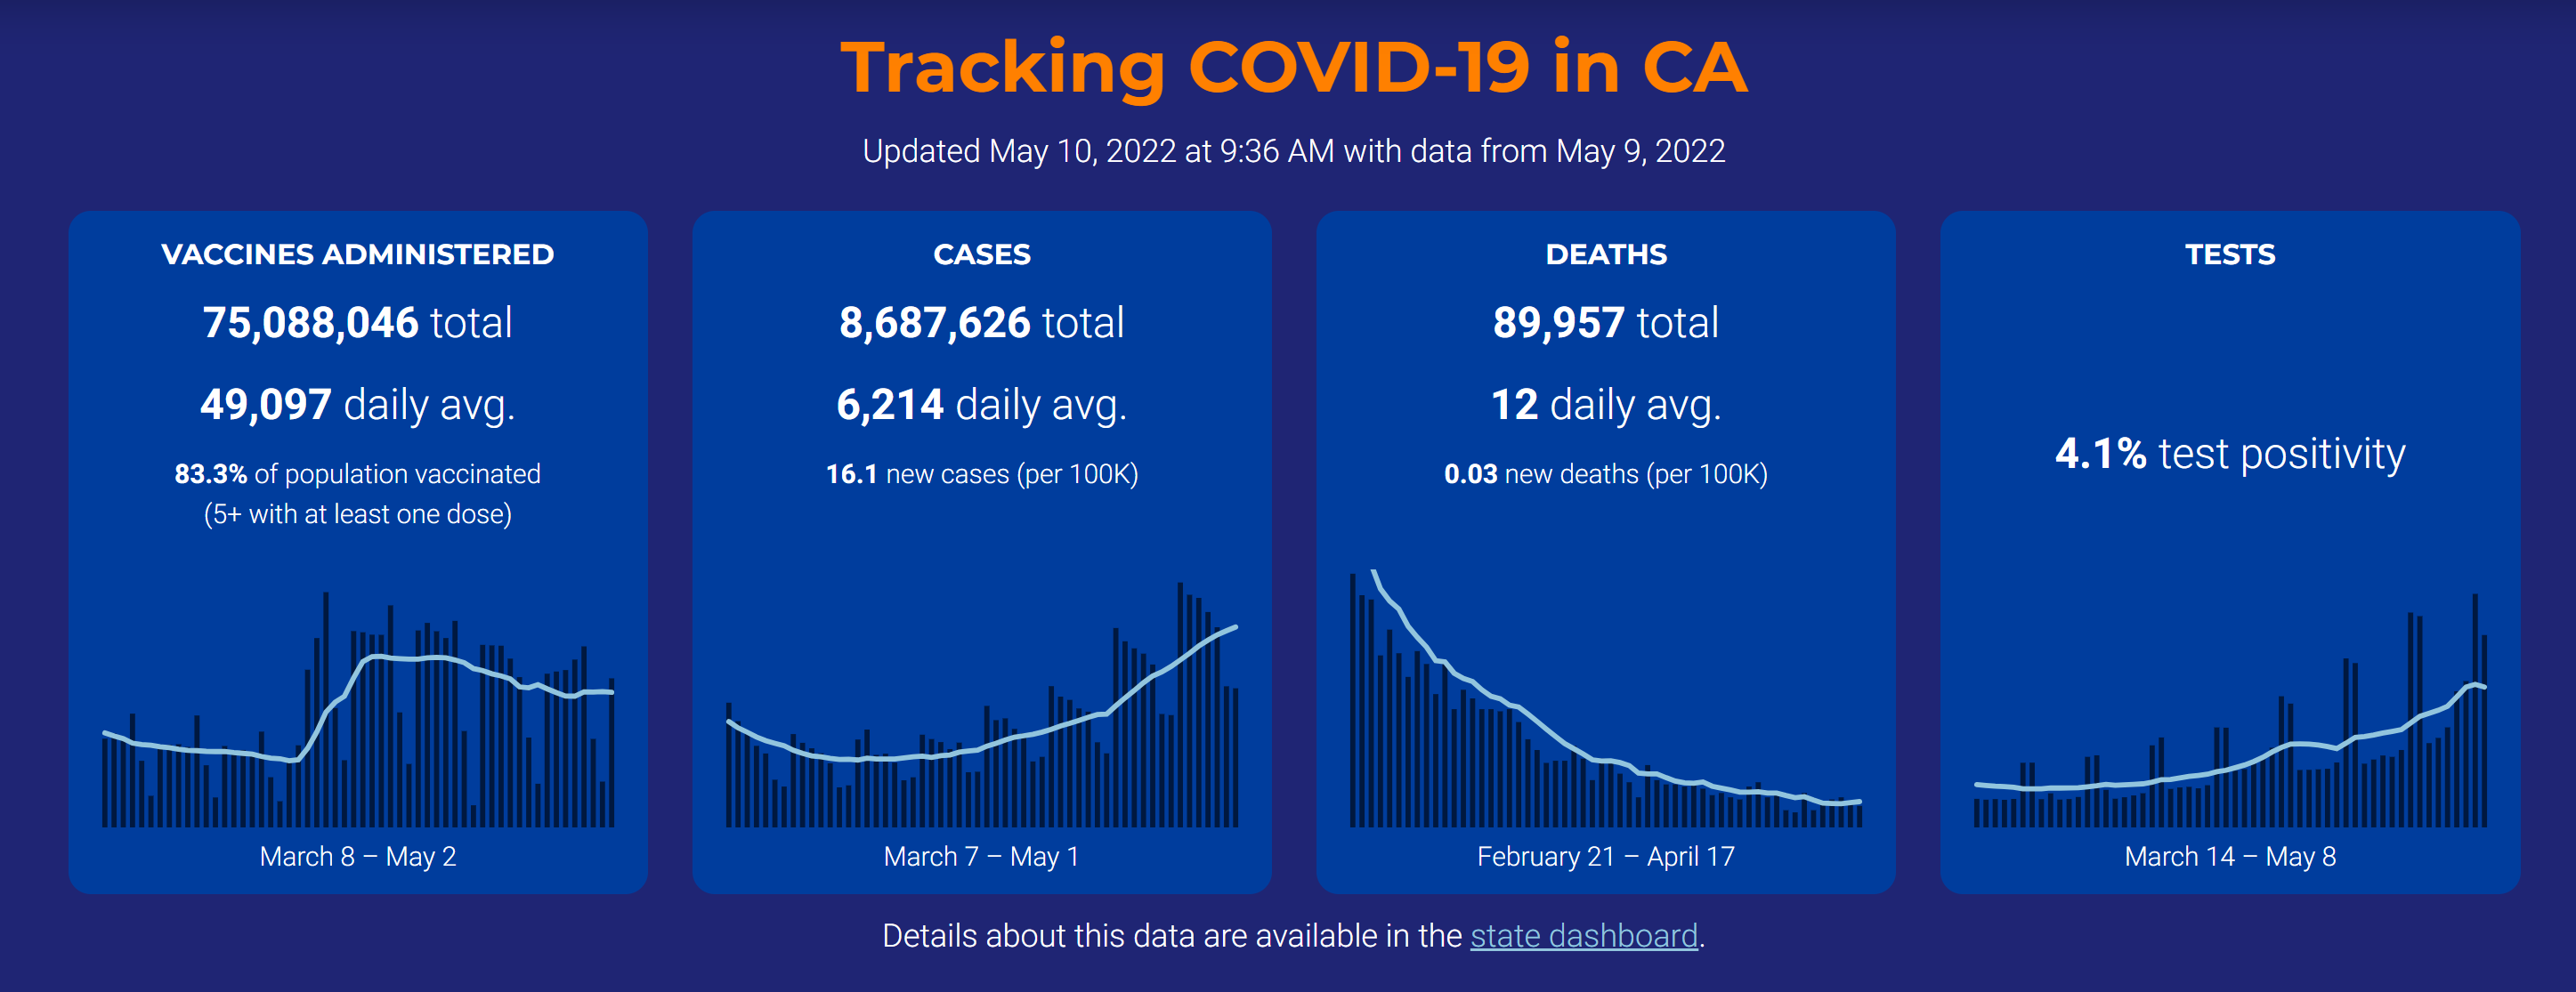 COVID-19 Cases In California Remain Low Despite Upticks in Some Variant Cases in the Past Few Weeks – California Globe